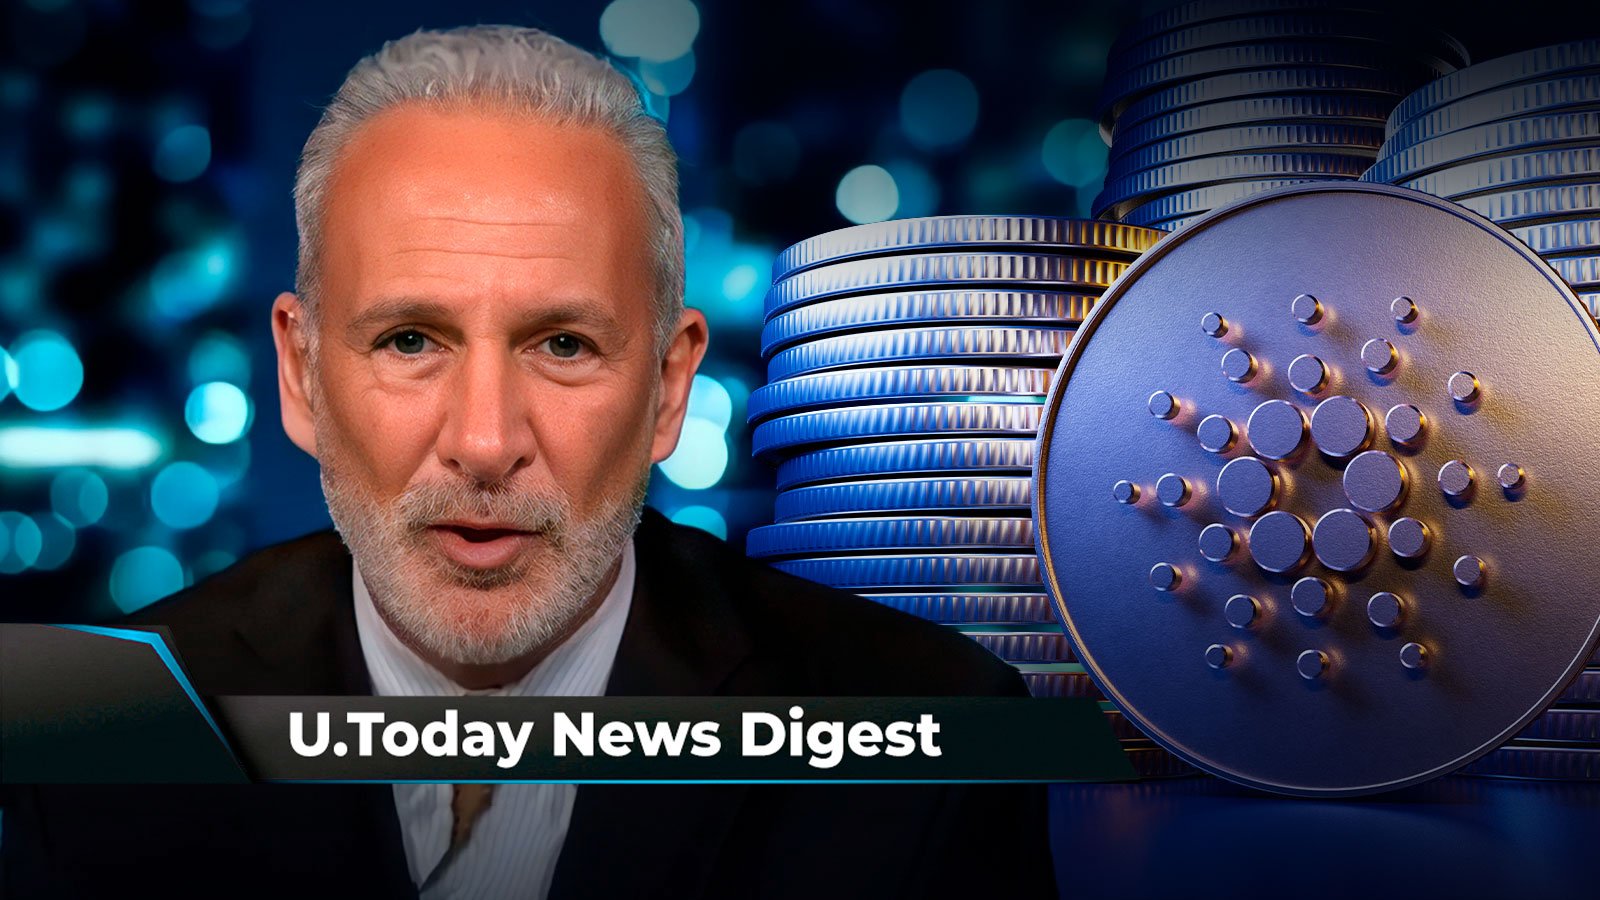 Cardano Hits Important Milestone in Vasil Testing, SHIB Listed by Yet Another Exchange, Peter Schiff Says BTC Will Drop Below $10,000: Crypto News Digest by U.Today